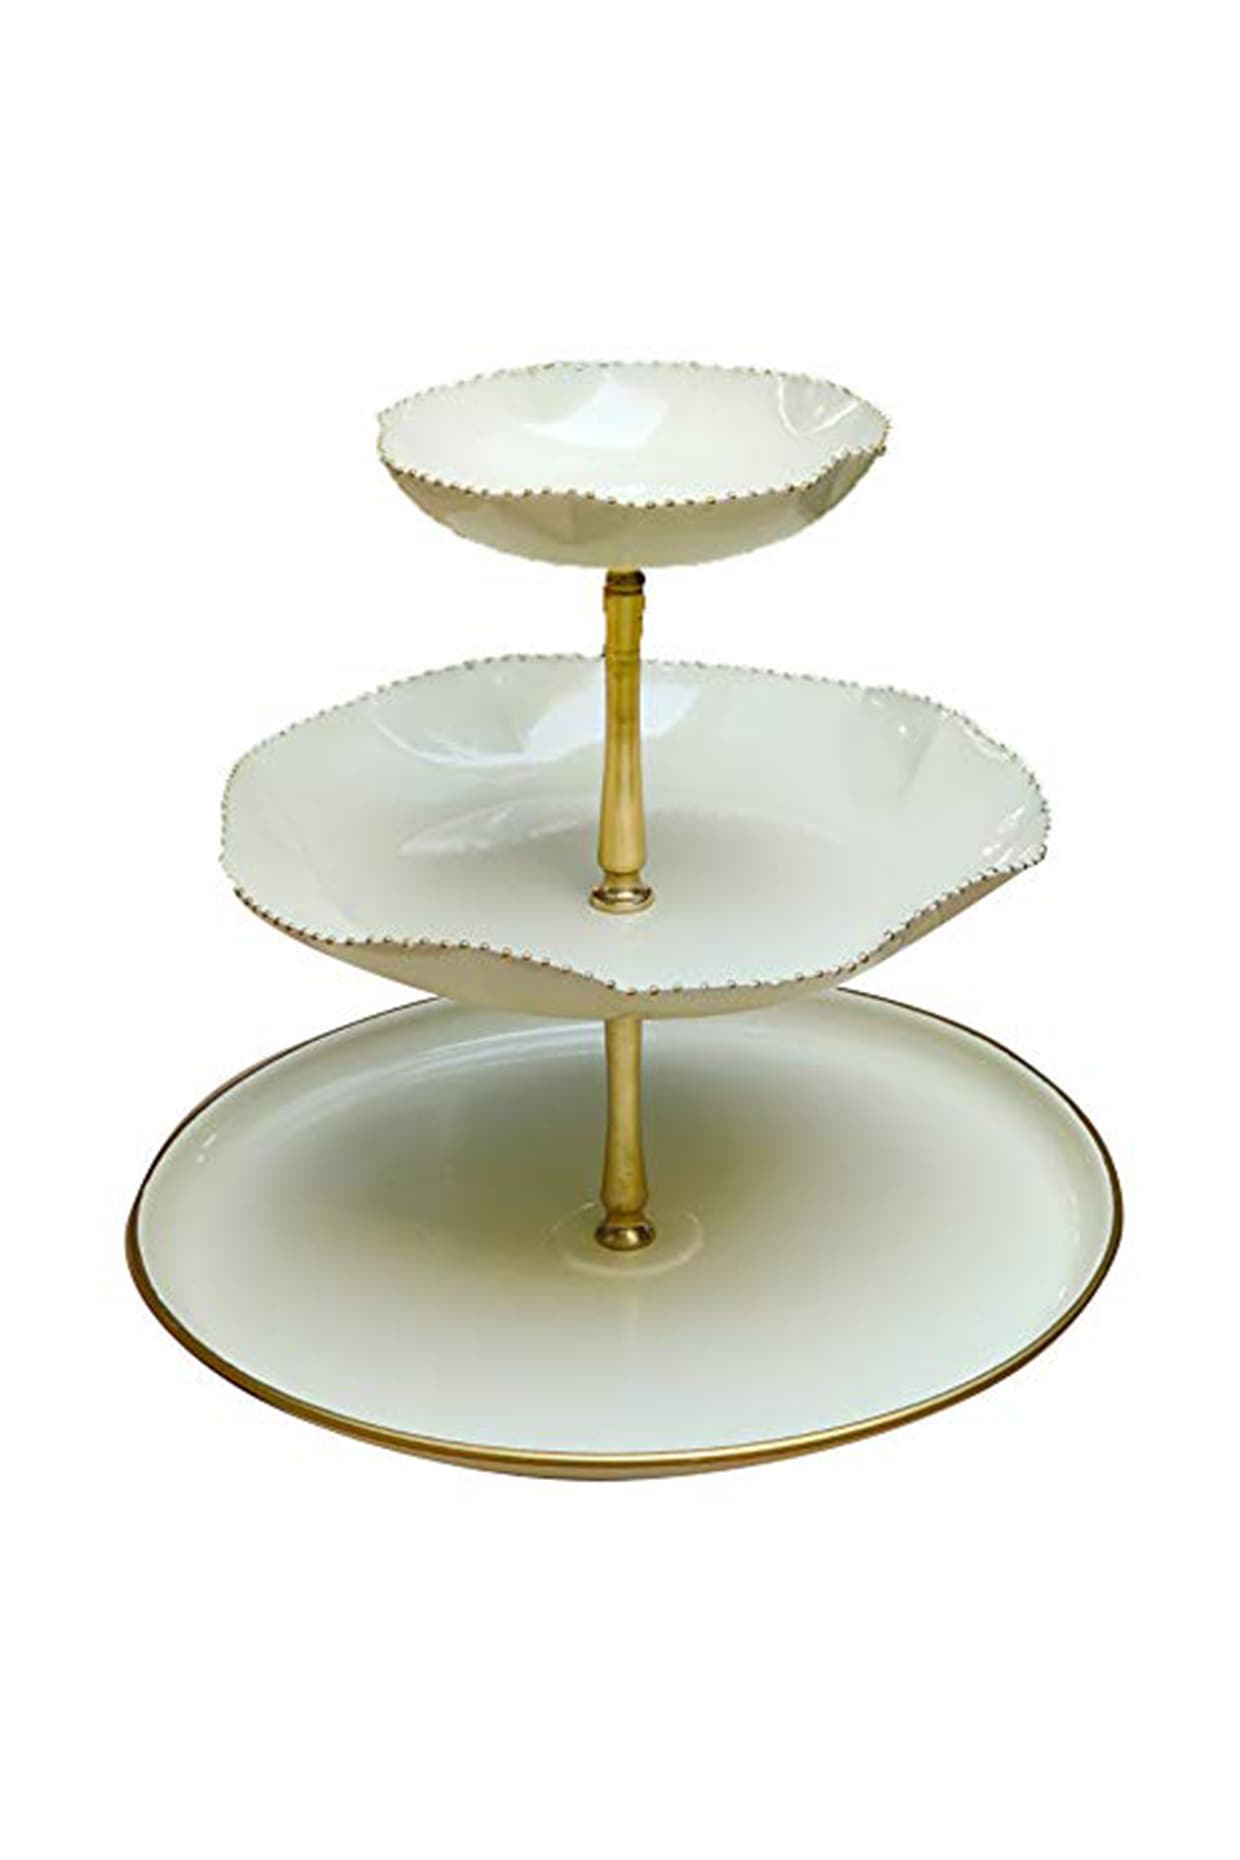 Baker's Cutlery Fibre Glass Heavy Cake Icing Rotating Aluminium Top  Turntable Cake Stand for Decoration - Aluminium Top - Made in India (12  Inch) - Baker's Cutlery